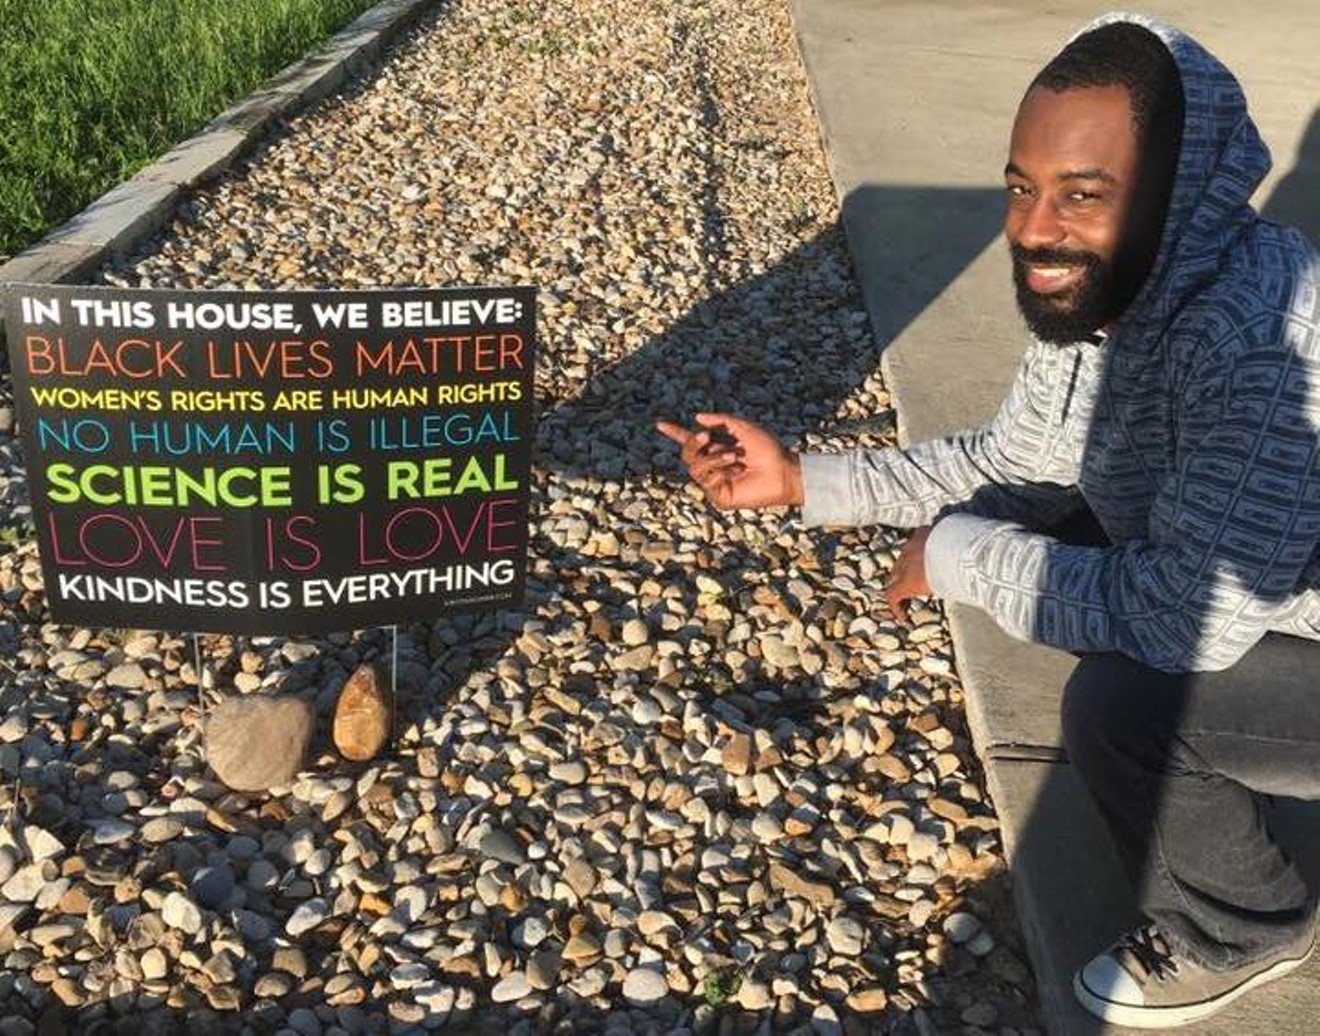 Two days before the incident, Rhodes posted this picture taken outside of his Austin Airbnb.